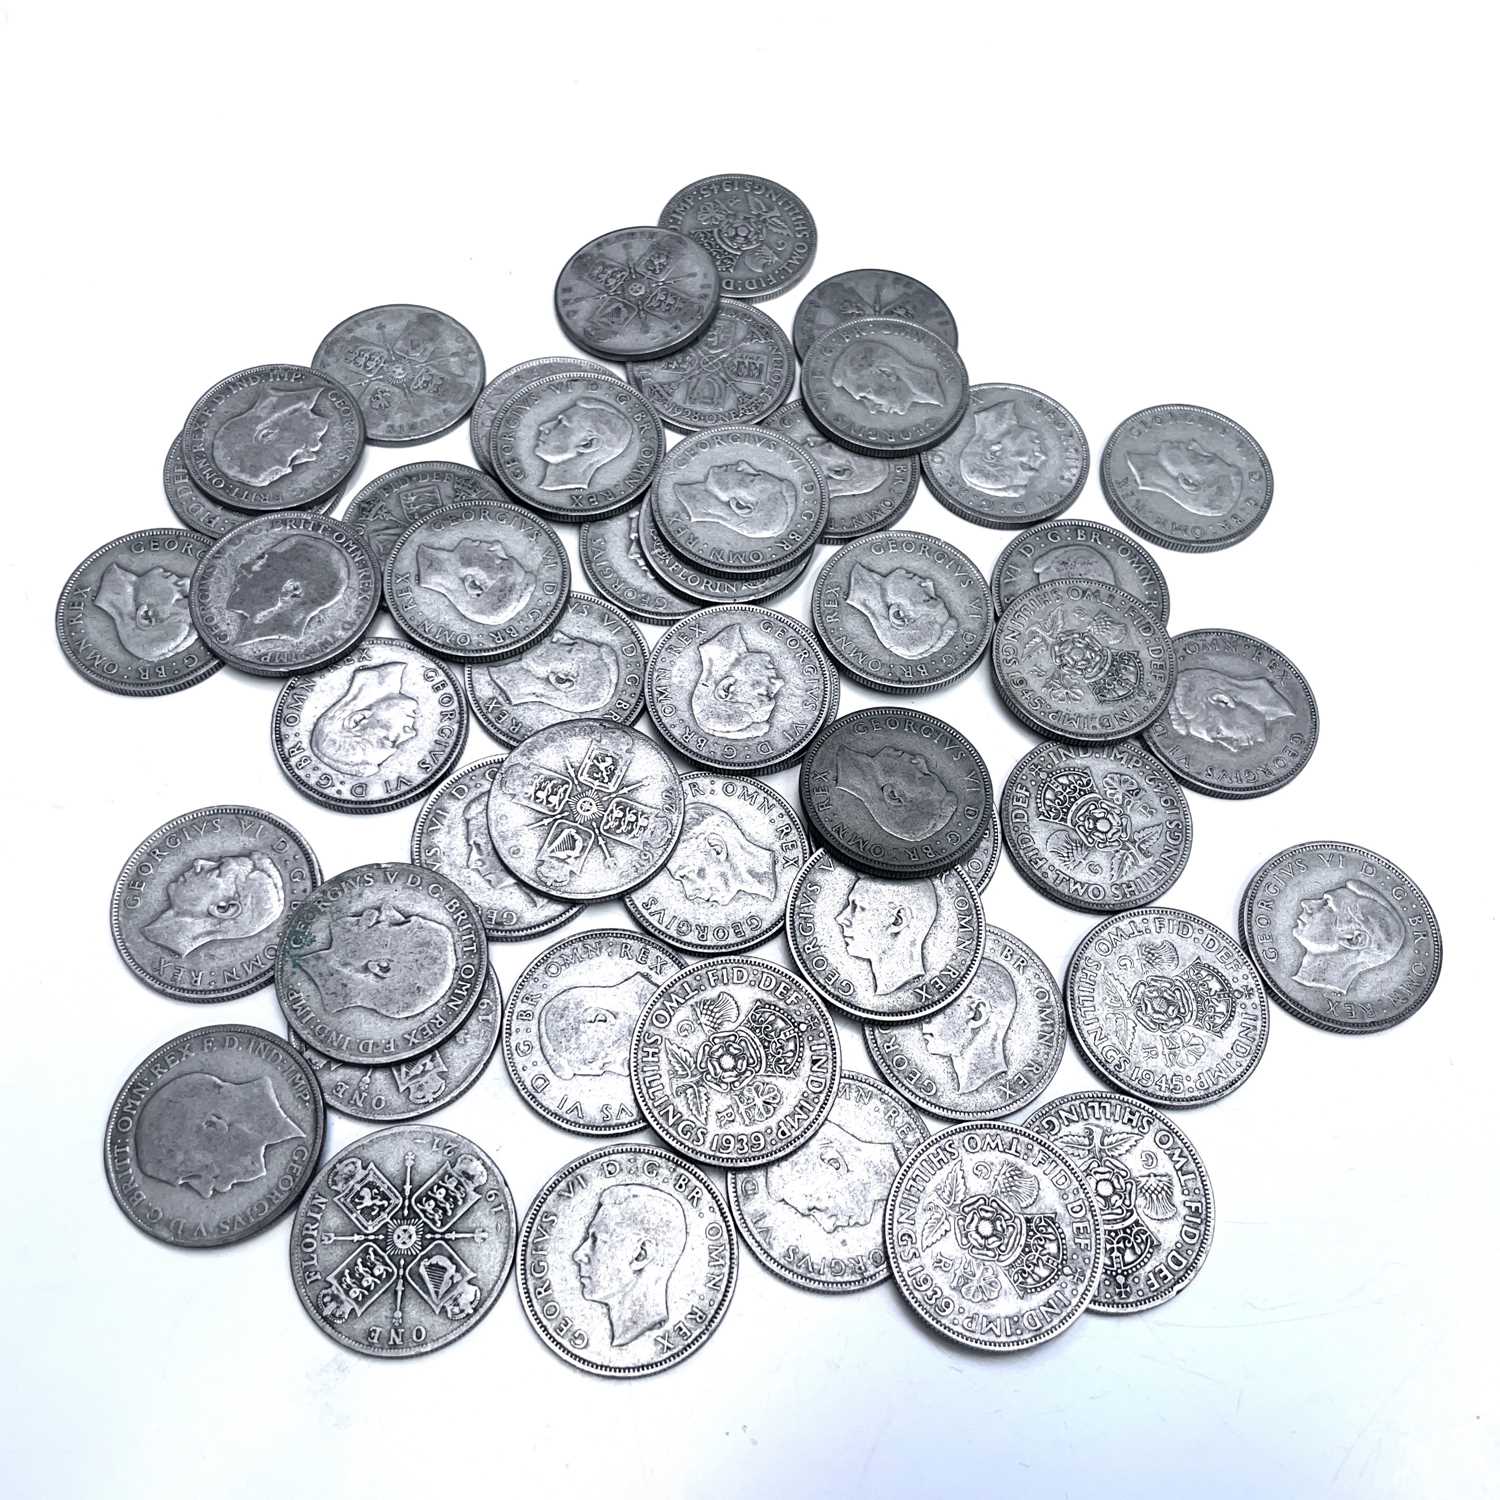 G.B. Pre 1947 Silver Coins. Comprising a bag containing £5 of pre 1947 G.B silver coinage.